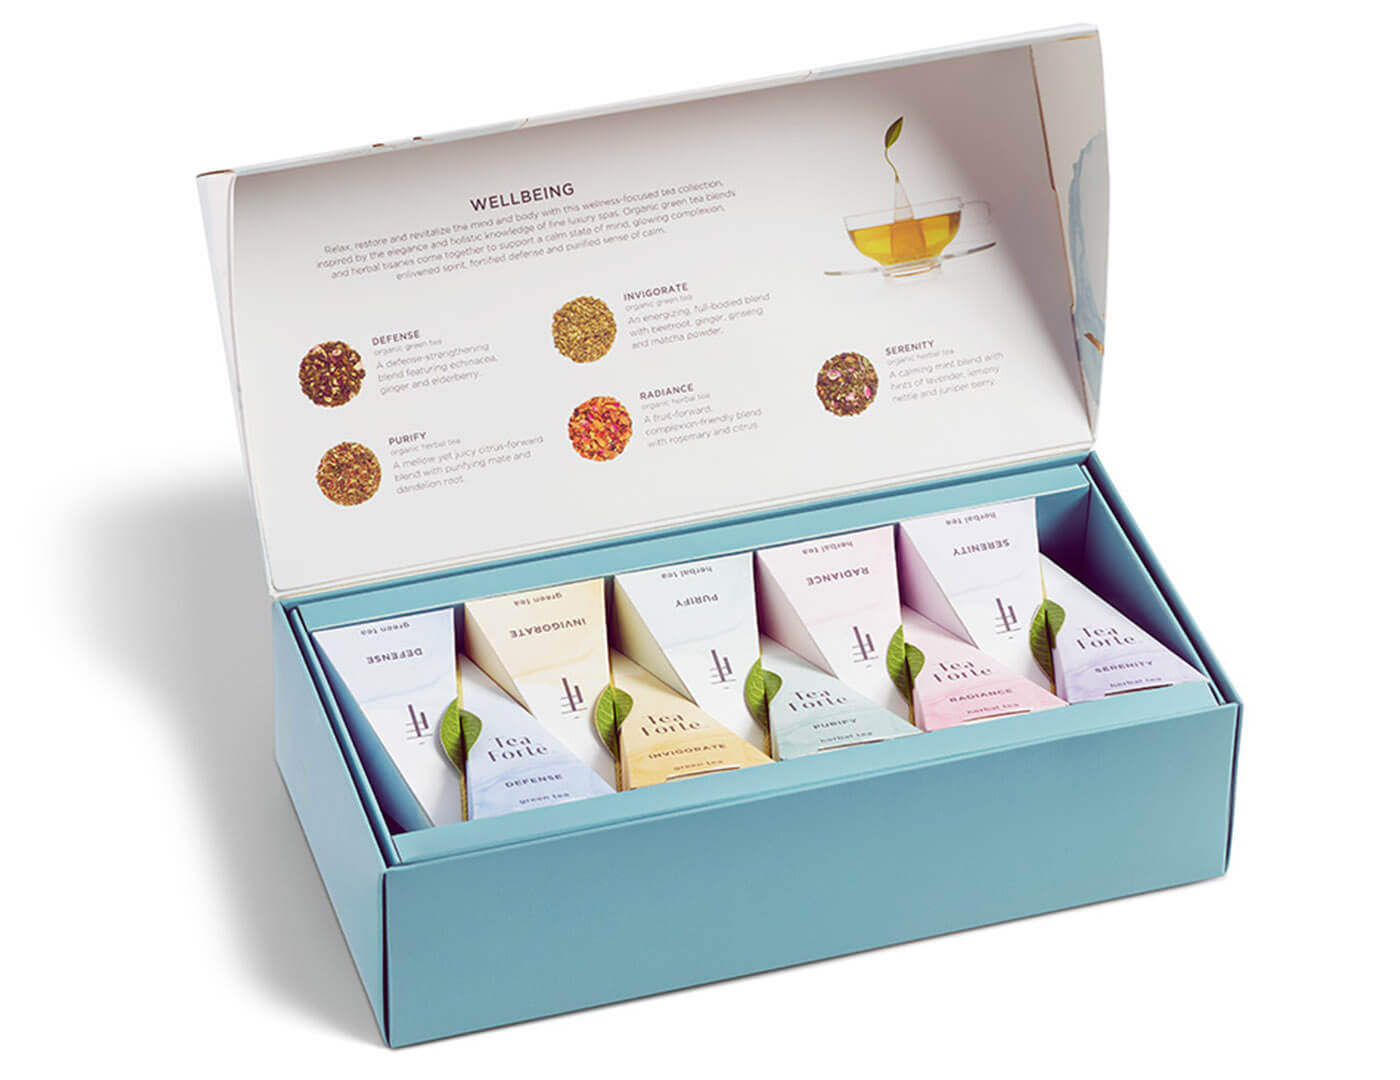 Wellbeing tea assortment in a 10 count petite presentation box with lid open